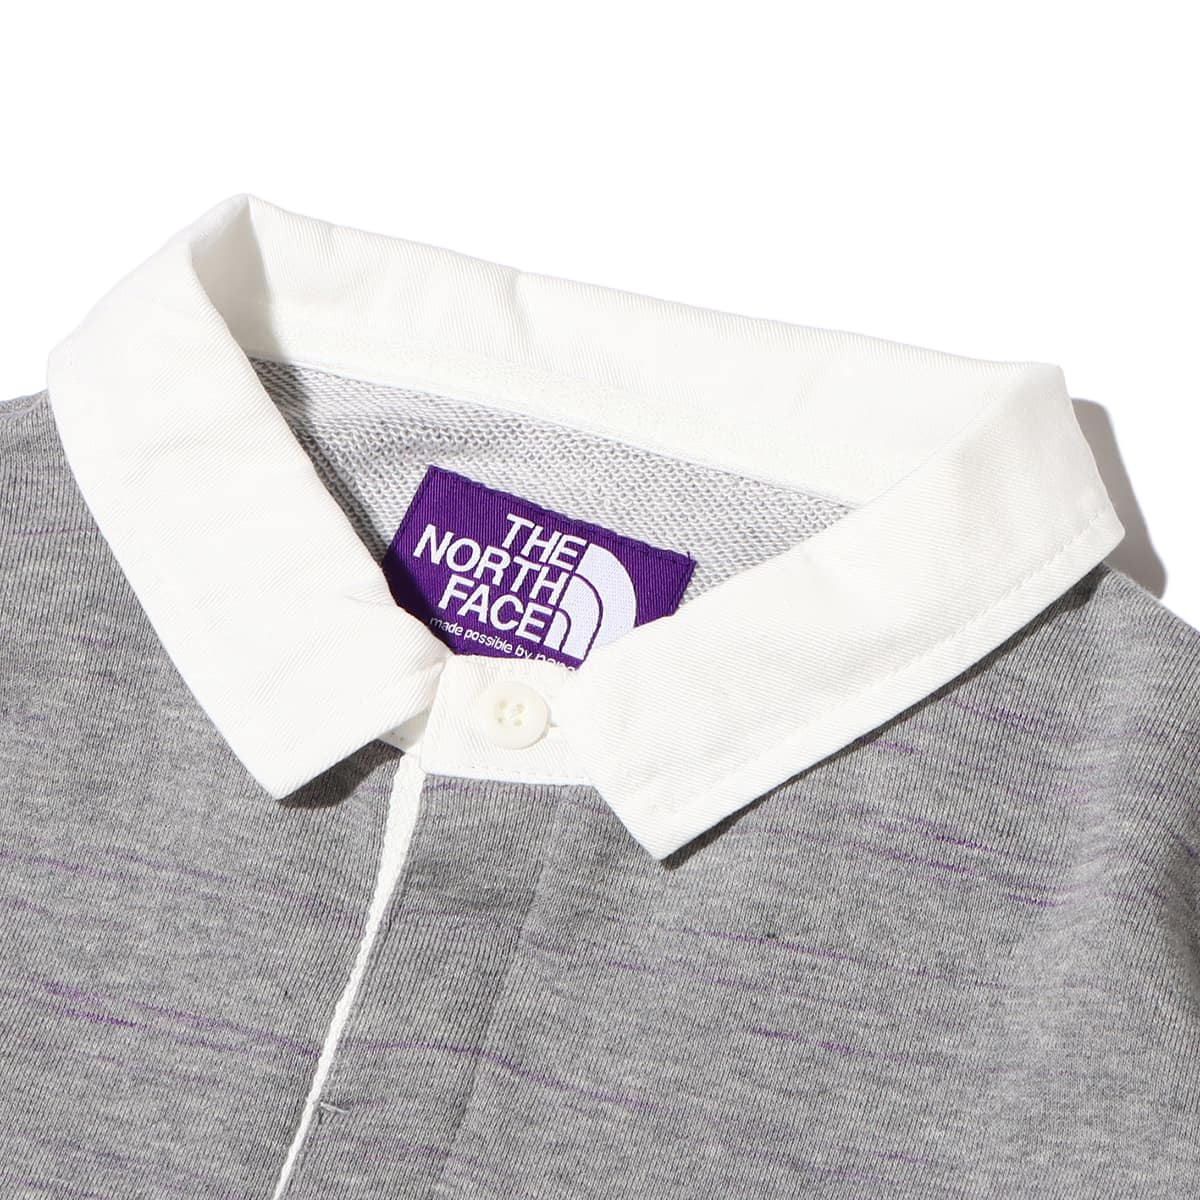 THE NORTH FACE PURPLE LABEL Rugby Sweatshirt Mix Gray 23SS-I